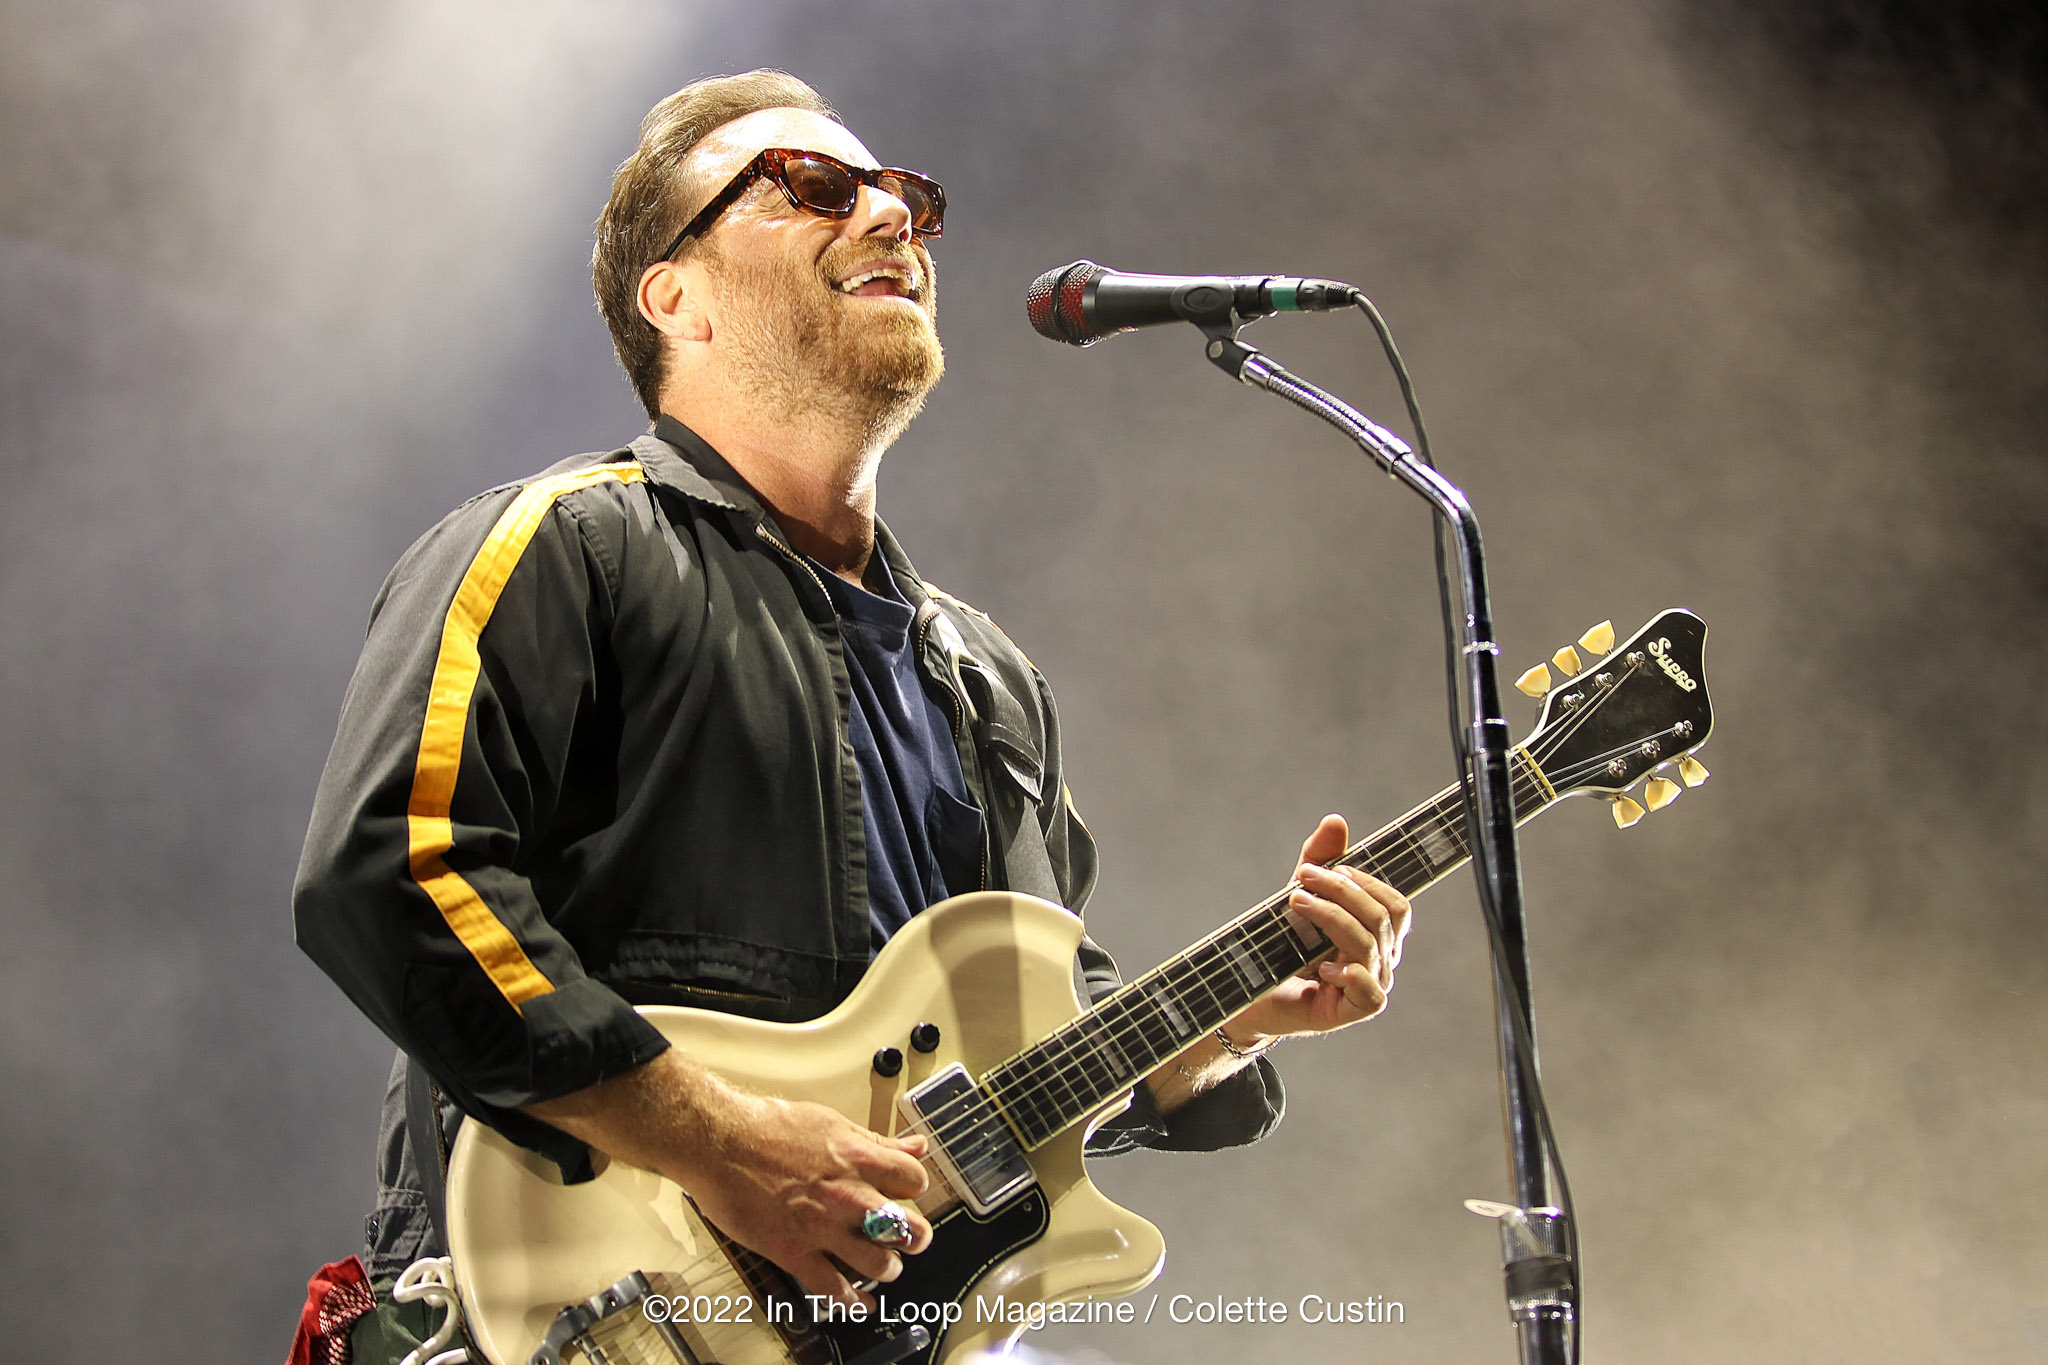 Live Review: The Black Keys Live At Hollywood Casino Amphitheatre In Tinley Park